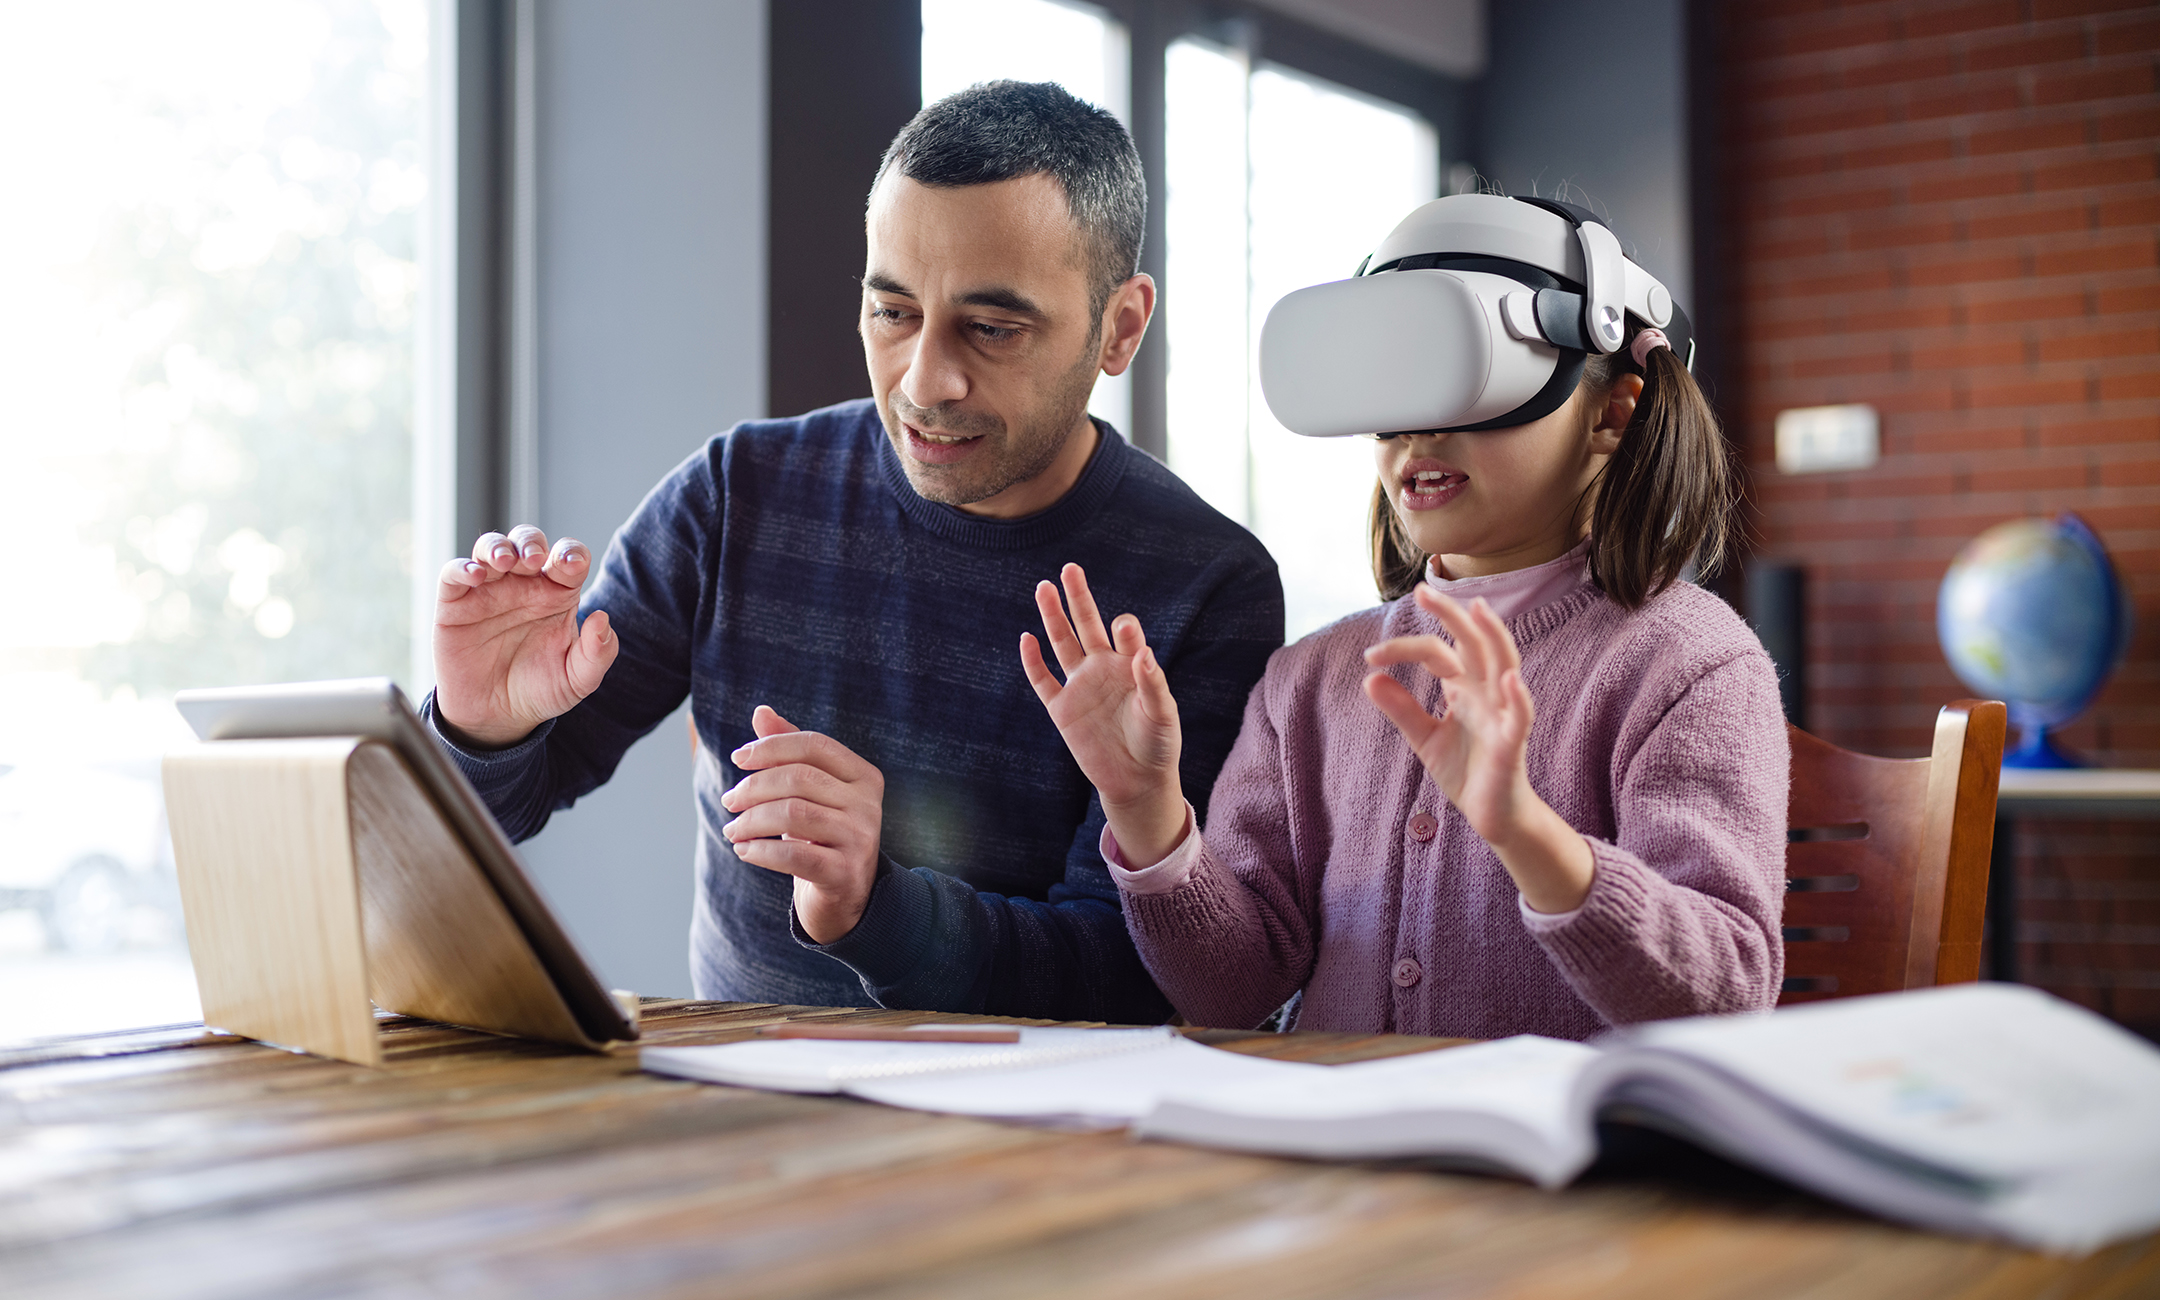 Father helping his daughter, who is wearing a VR headset, with homework